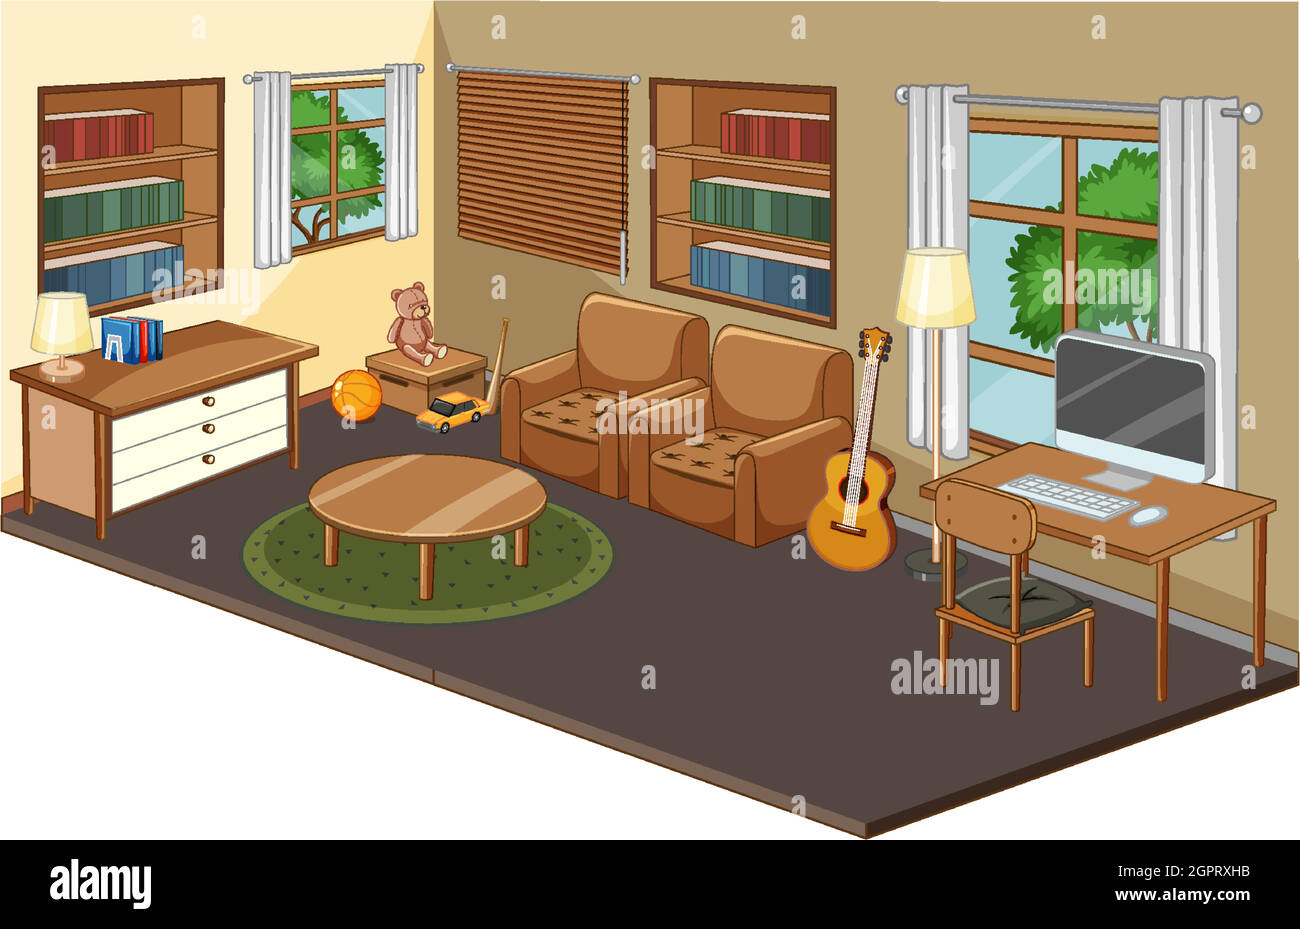 Living room interior with furniture Stock Vector